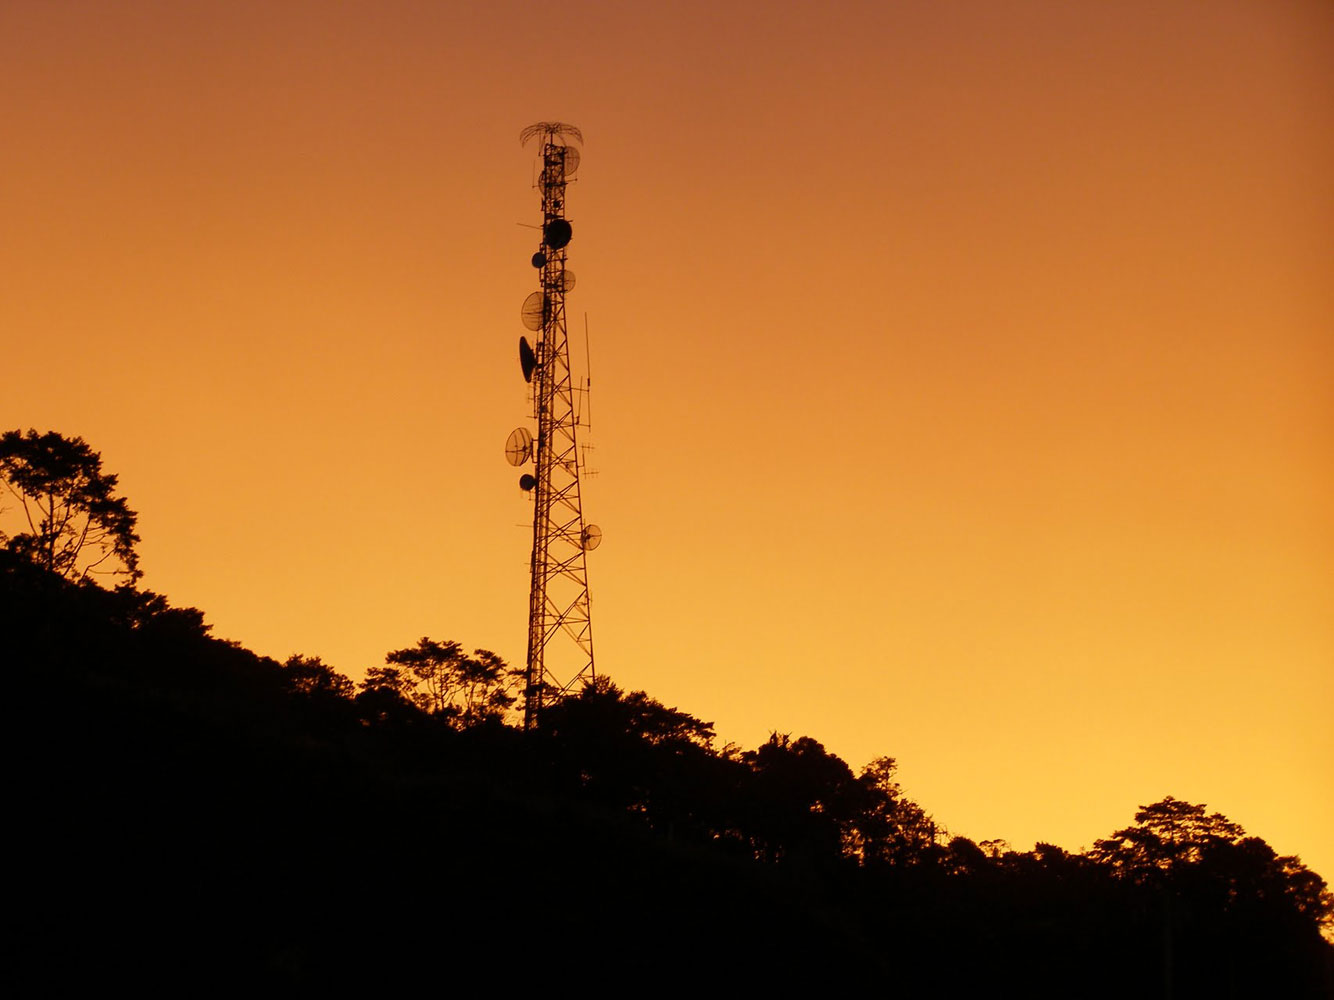 Lightning Protection - Papua New Guinea (Communication Tower)